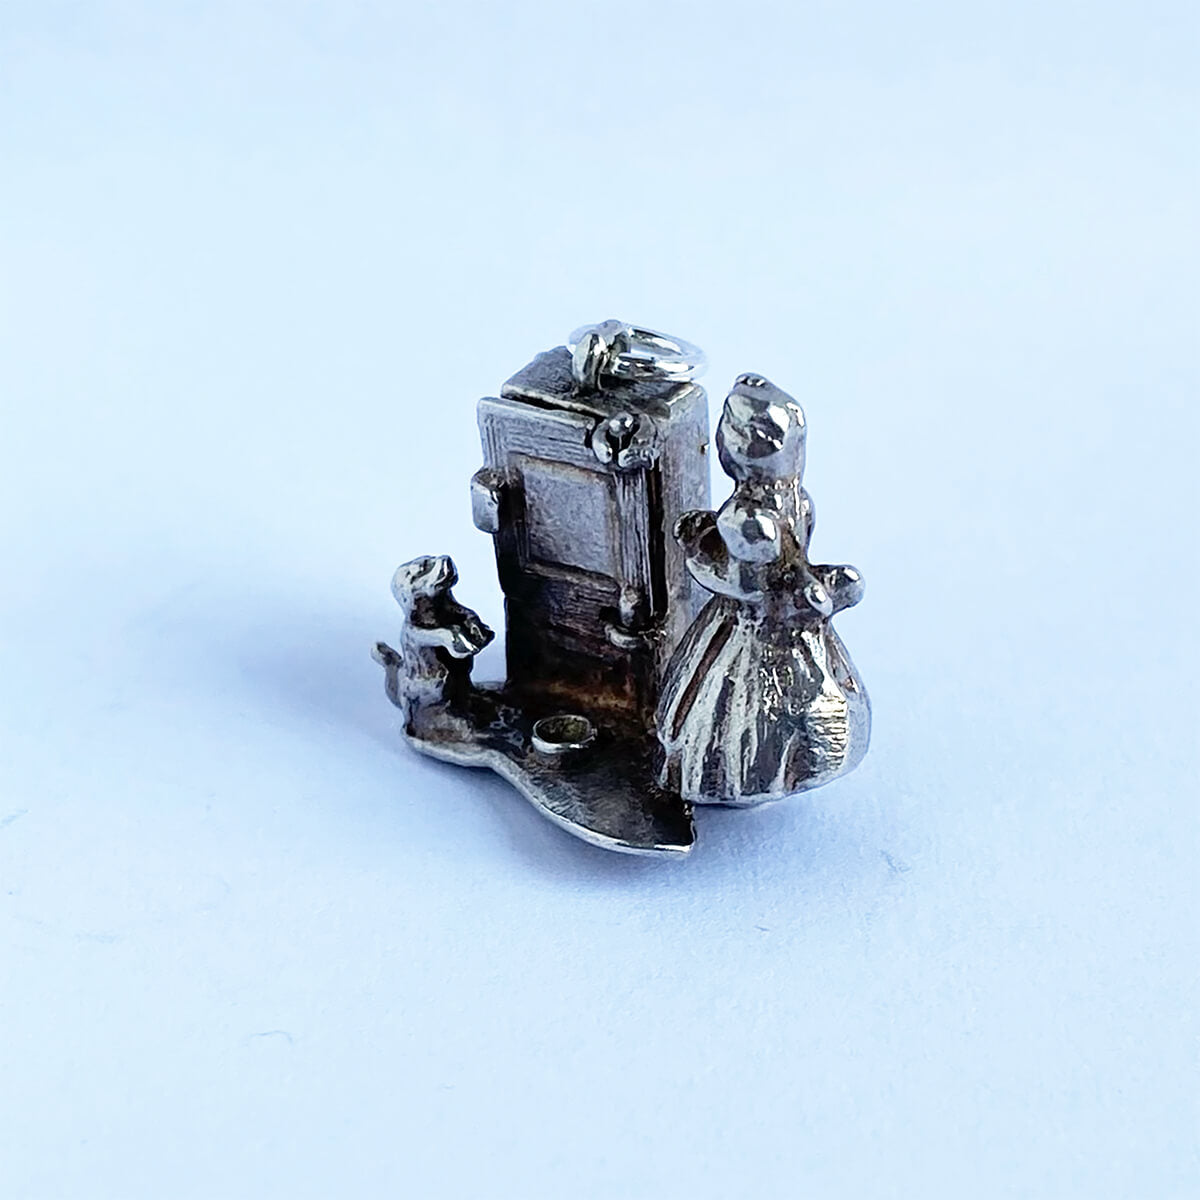 Vintage silver Old Mother Hubbard and dog nursery rhyme charm